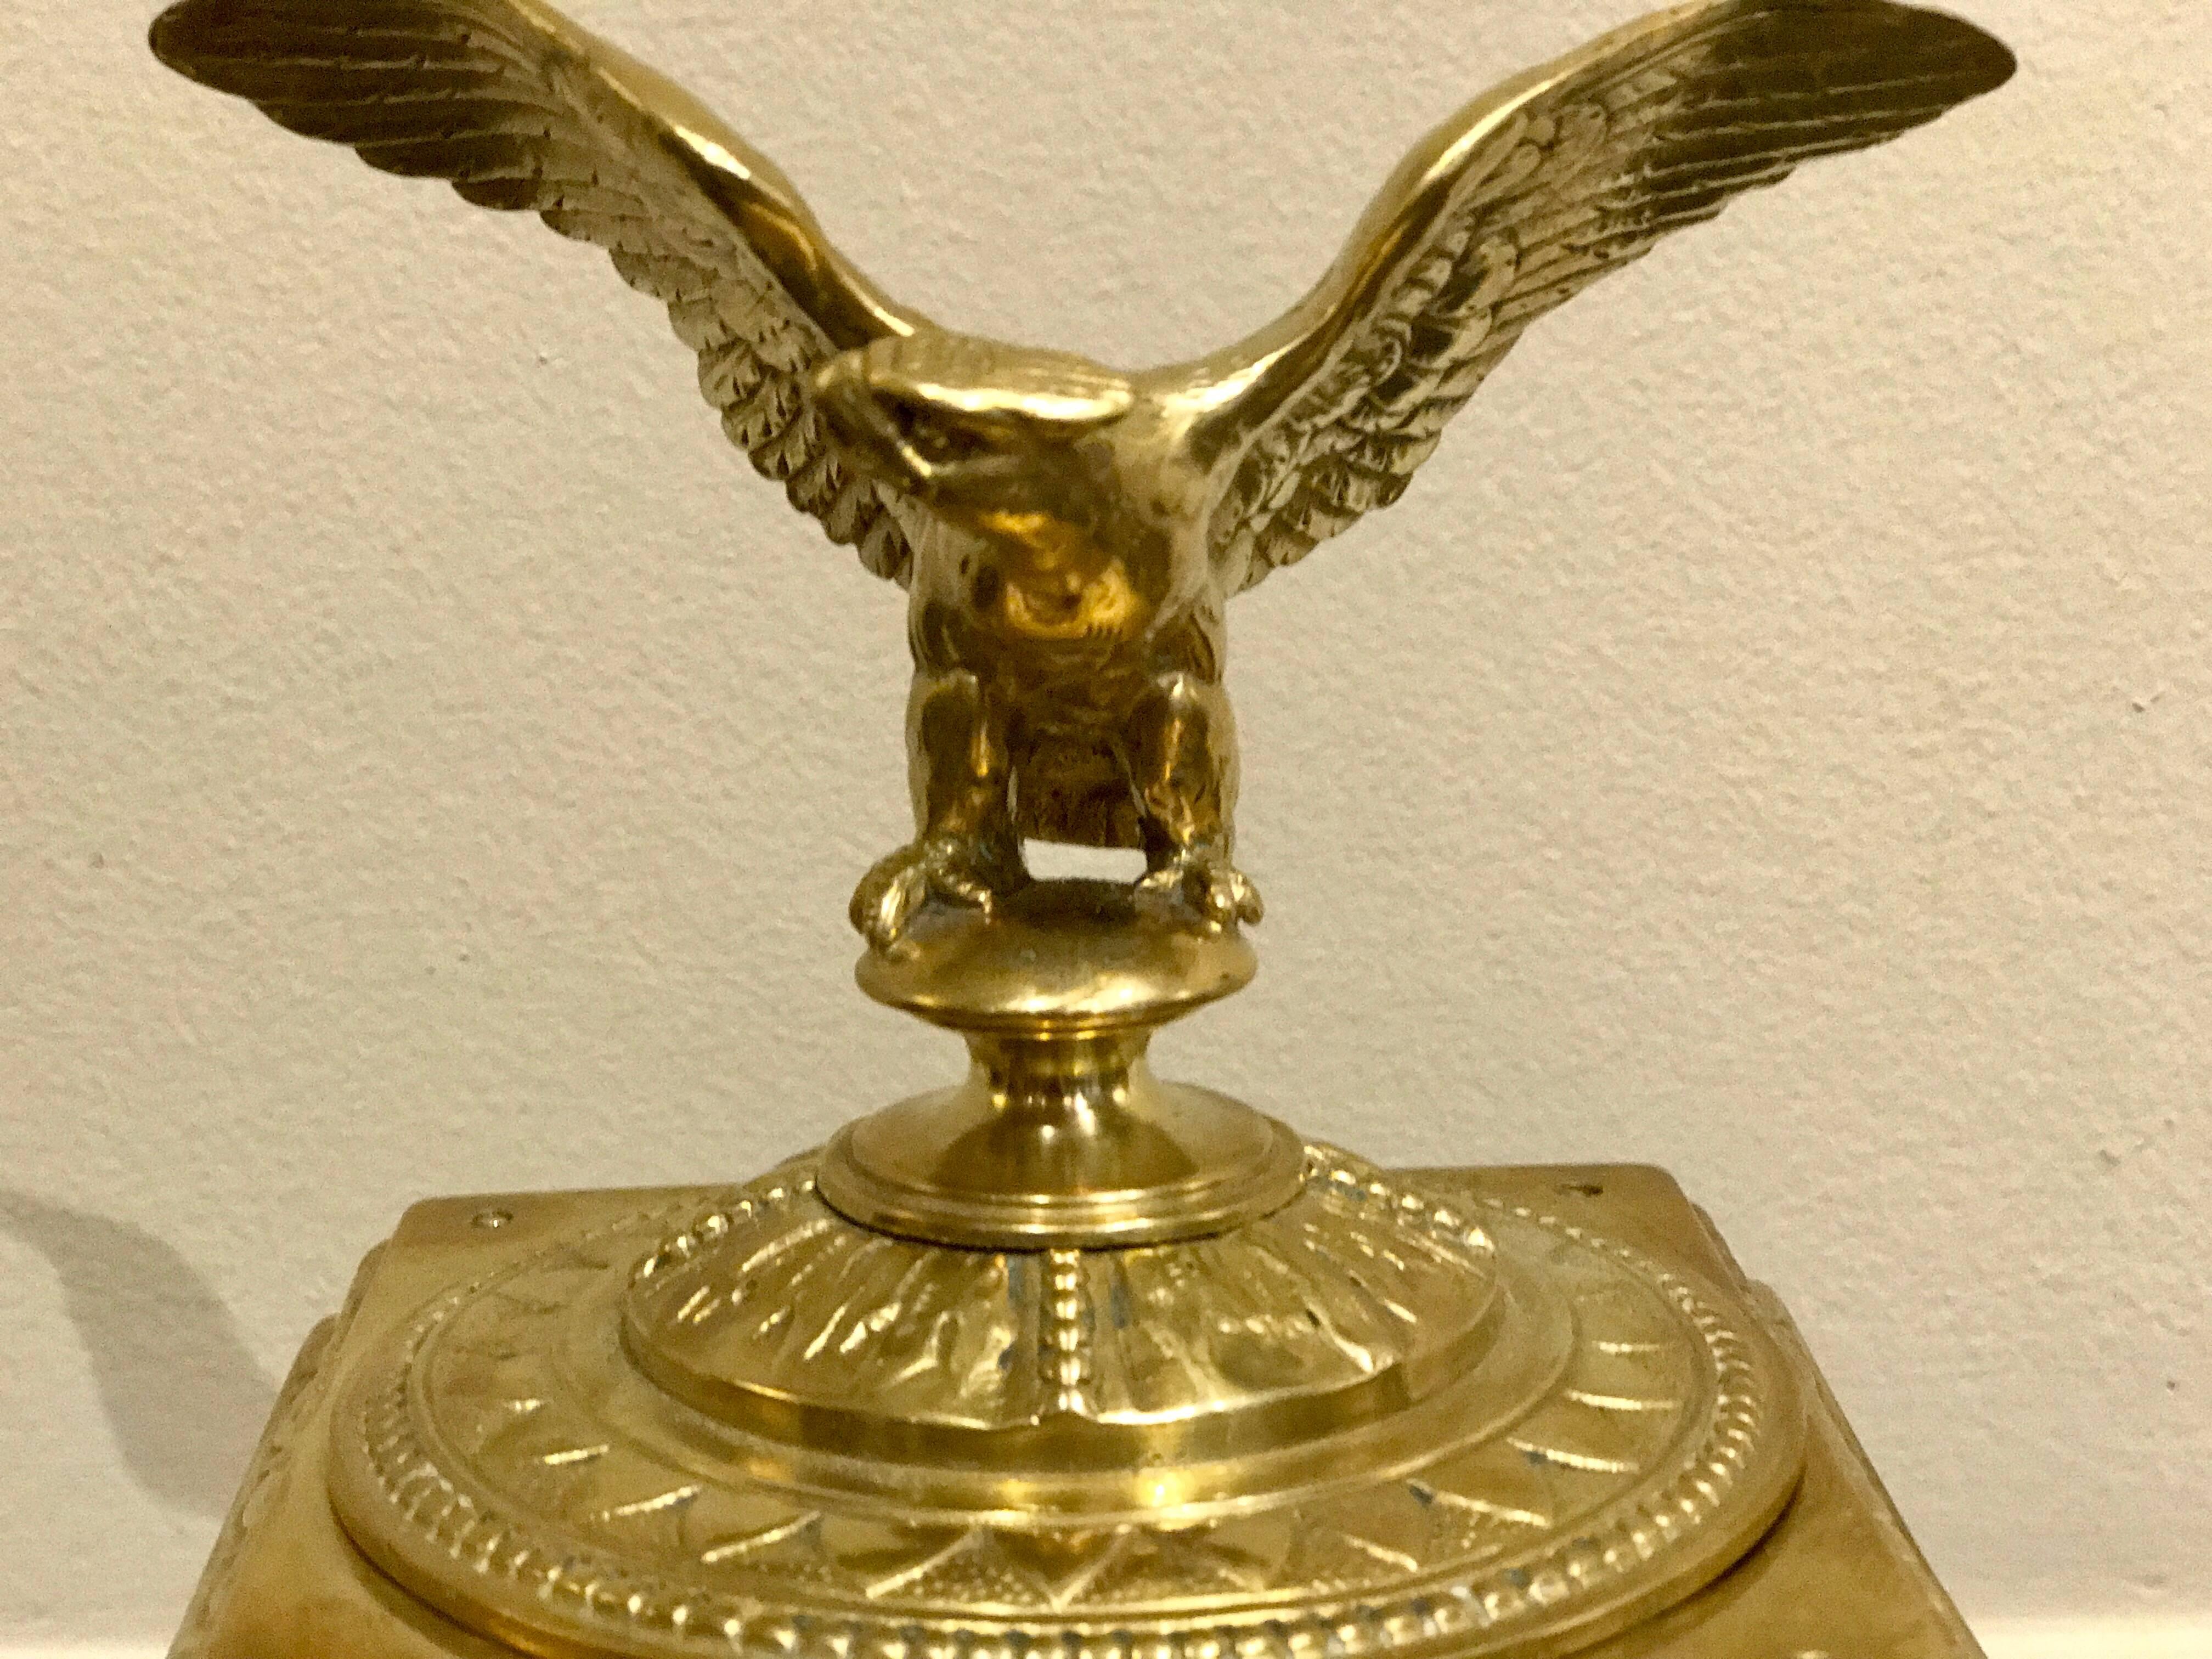 Napoleon III bronze eagle motif inkwell, the lift top revealing a cut-glass inset inkwell, the base of square form with medallions of Zeus, with a pen rest at front.